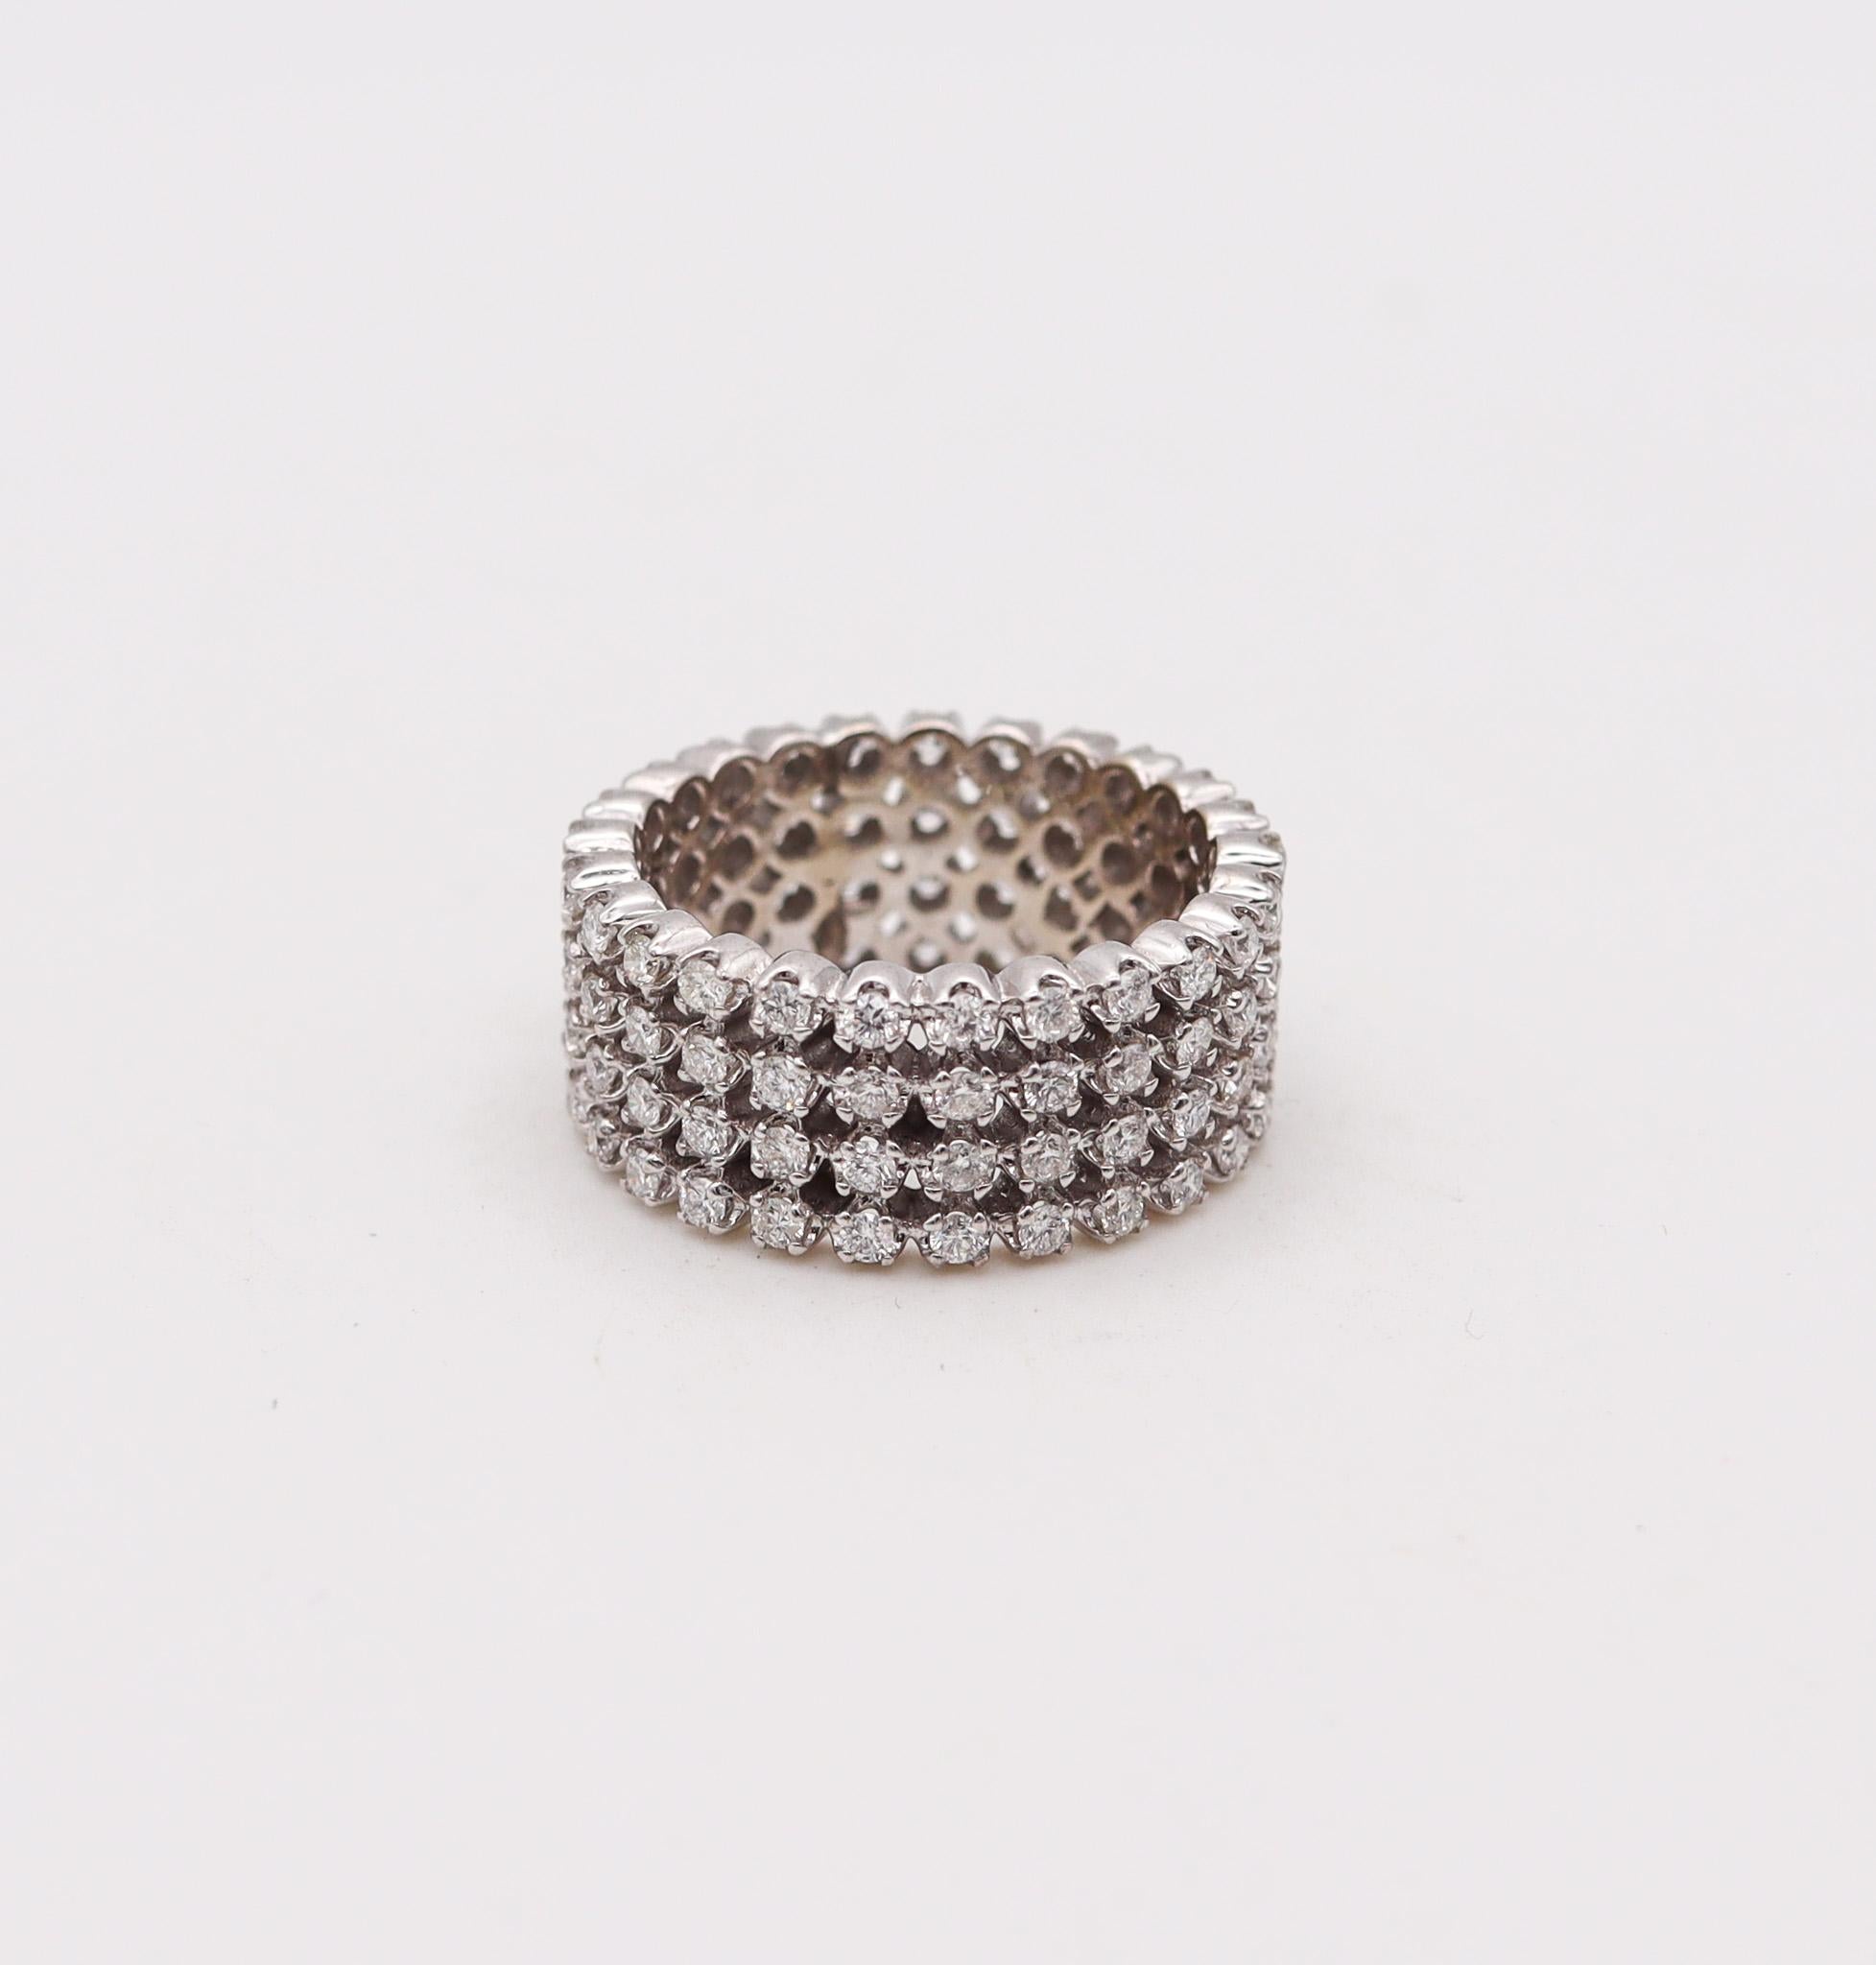 A quadruple eternity ring band with Natural diamonds.

Modernist eternity quadruple full four ring band made in Italy. This unusual eternity ring was crafted with a bold and thick solid look in solid white gold of 18 karats with high polished